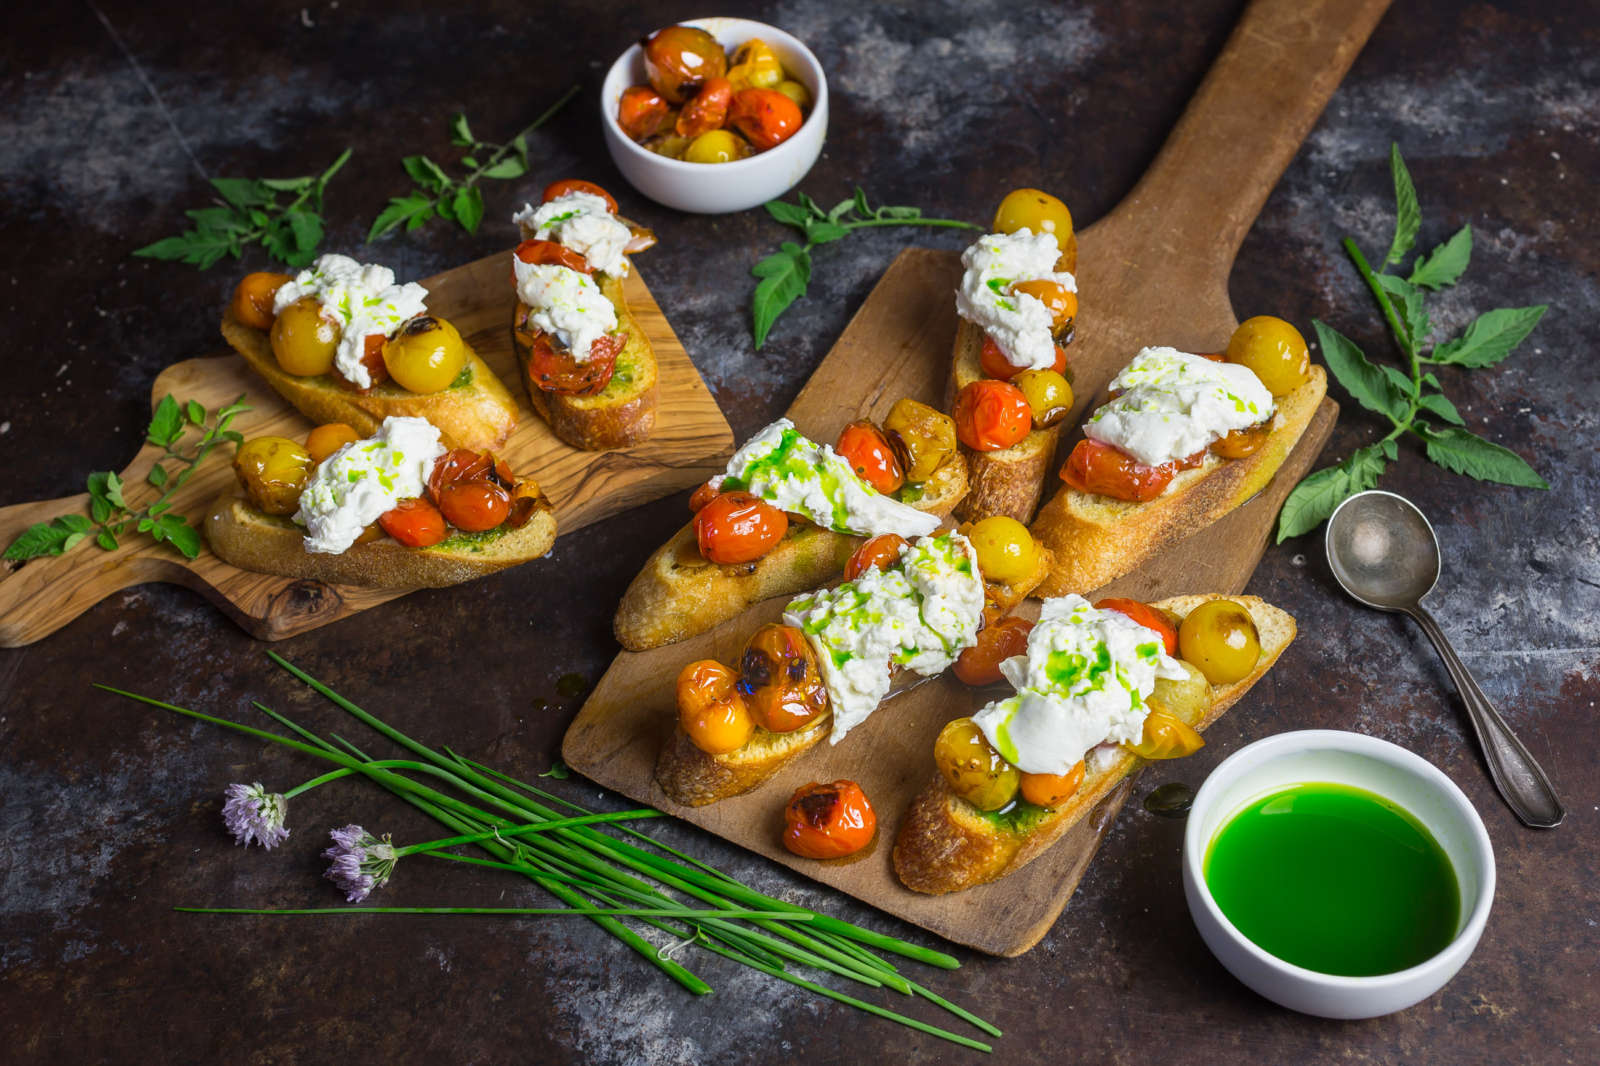 Crostini with Blistered Cherry Tomatoes, Burrata and Chive Oil